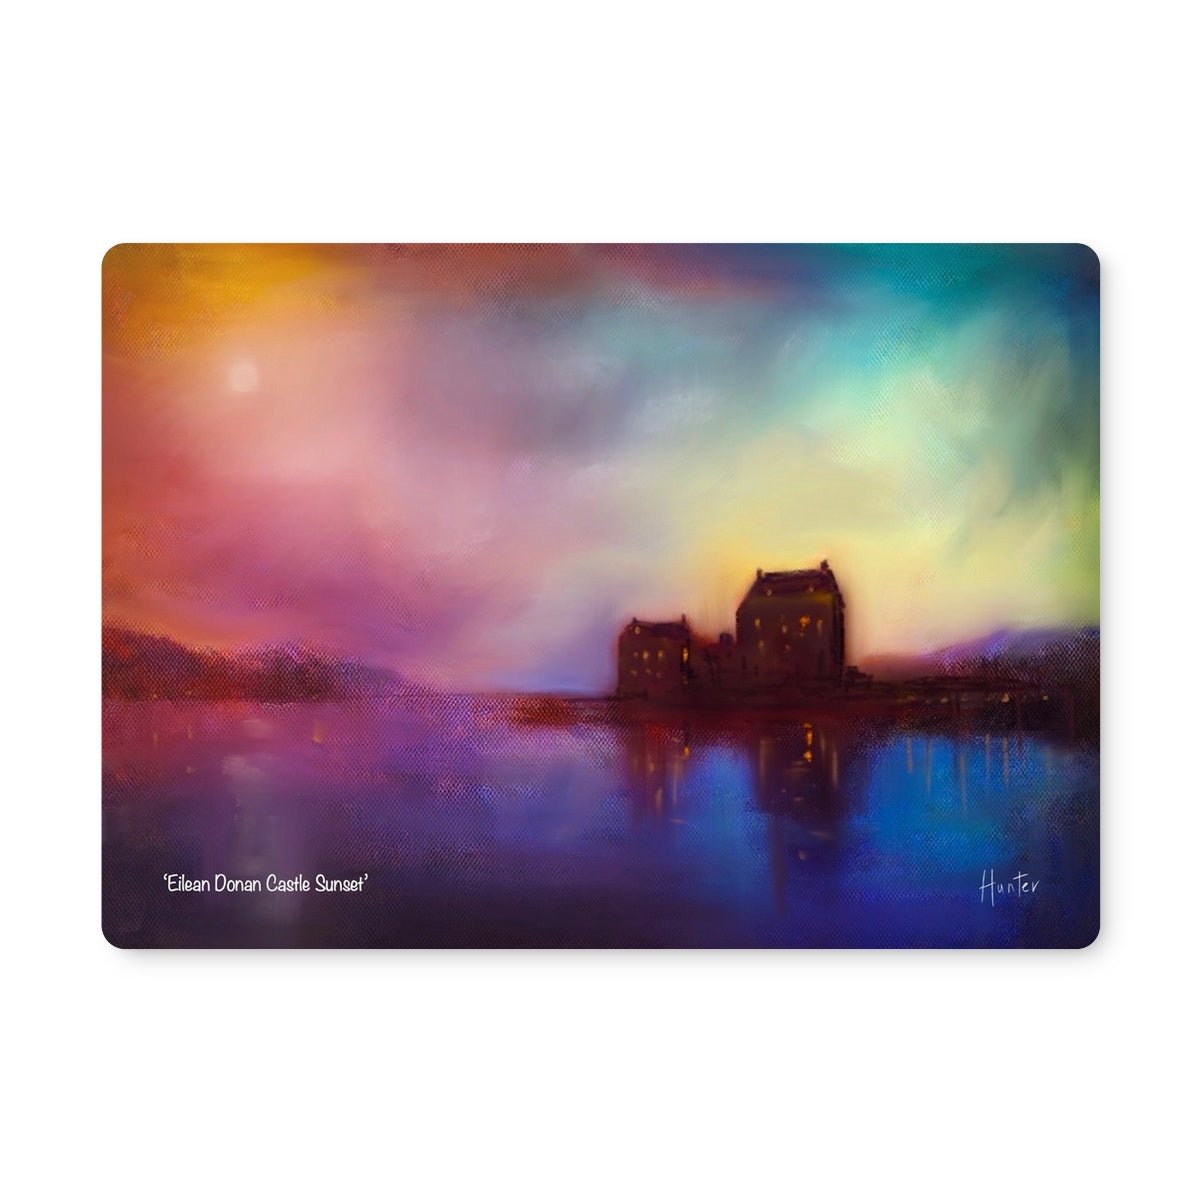 Eilean Donan Castle Sunset Art Gifts Placemat-Placemats-Scottish Castles Art Gallery-6 Placemats-Paintings, Prints, Homeware, Art Gifts From Scotland By Scottish Artist Kevin Hunter